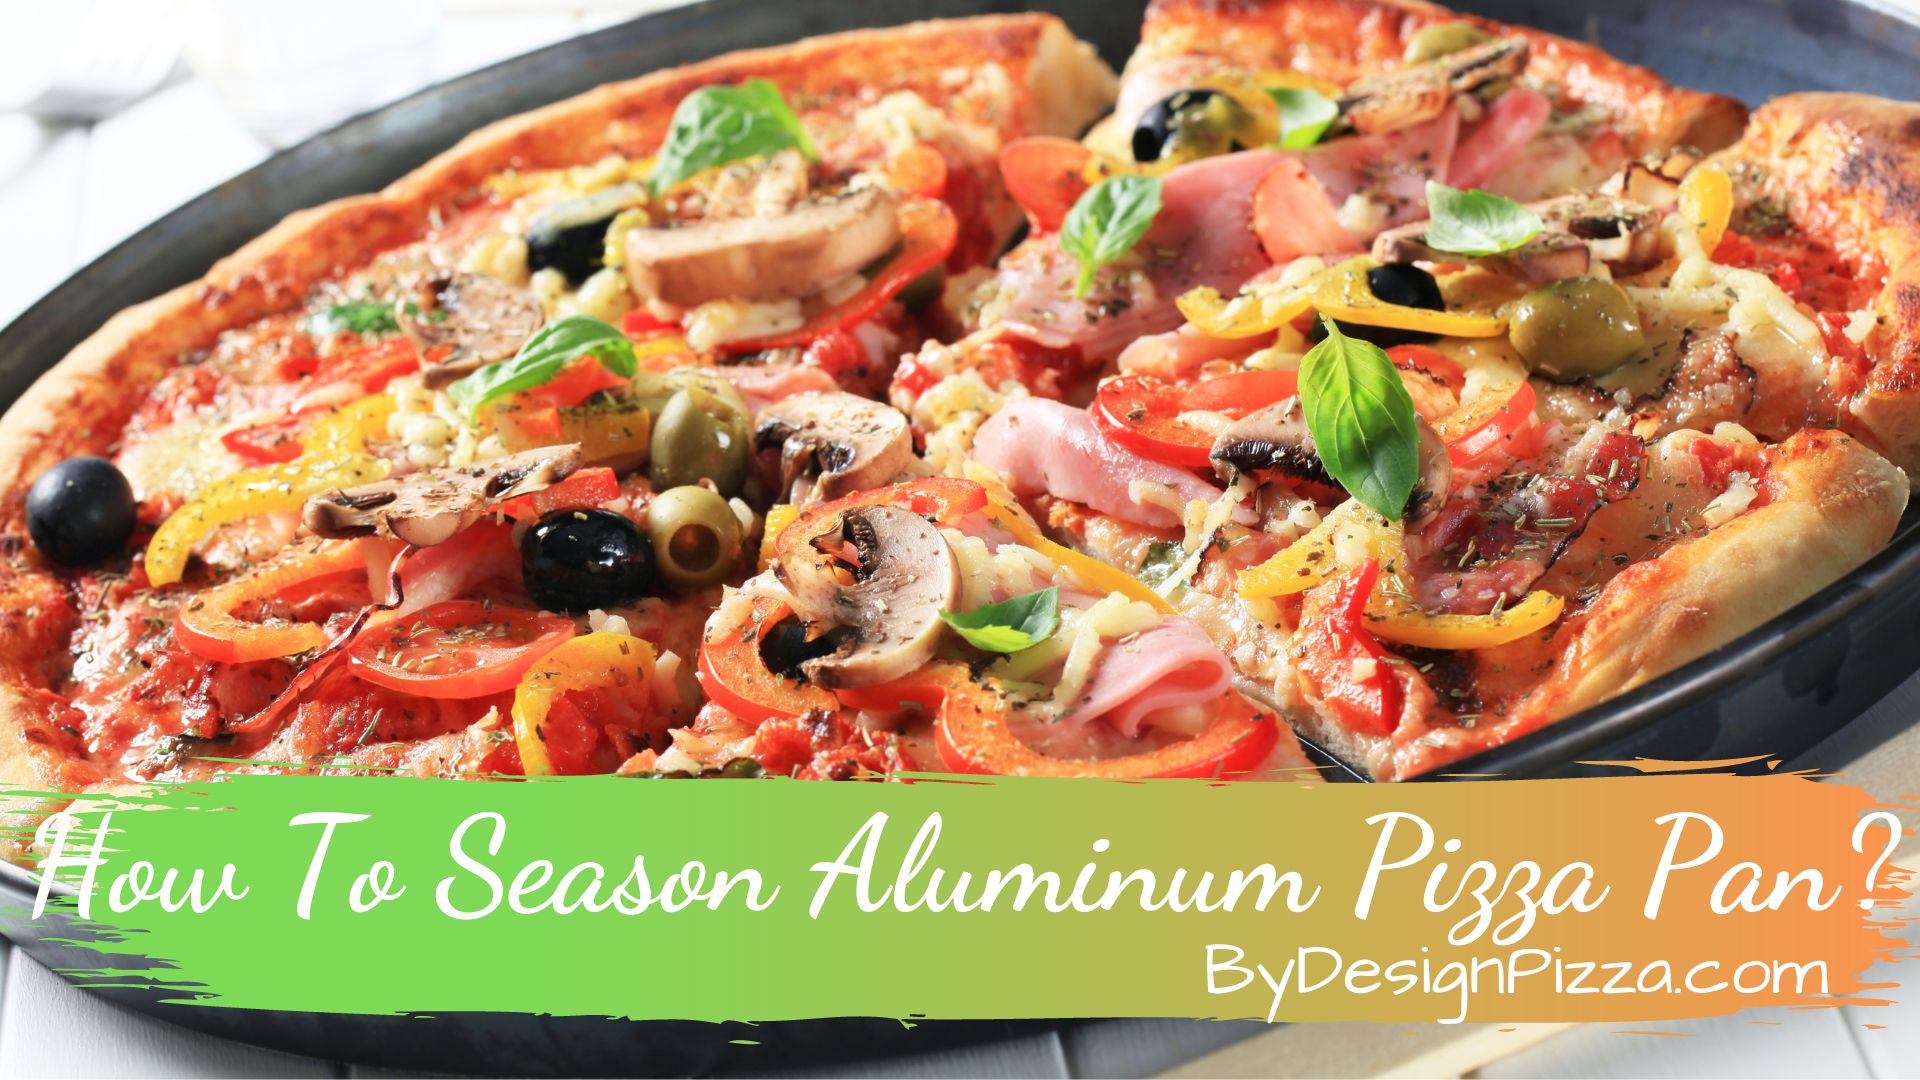 How To Season Aluminum Pizza Pan? - By Design Pizza